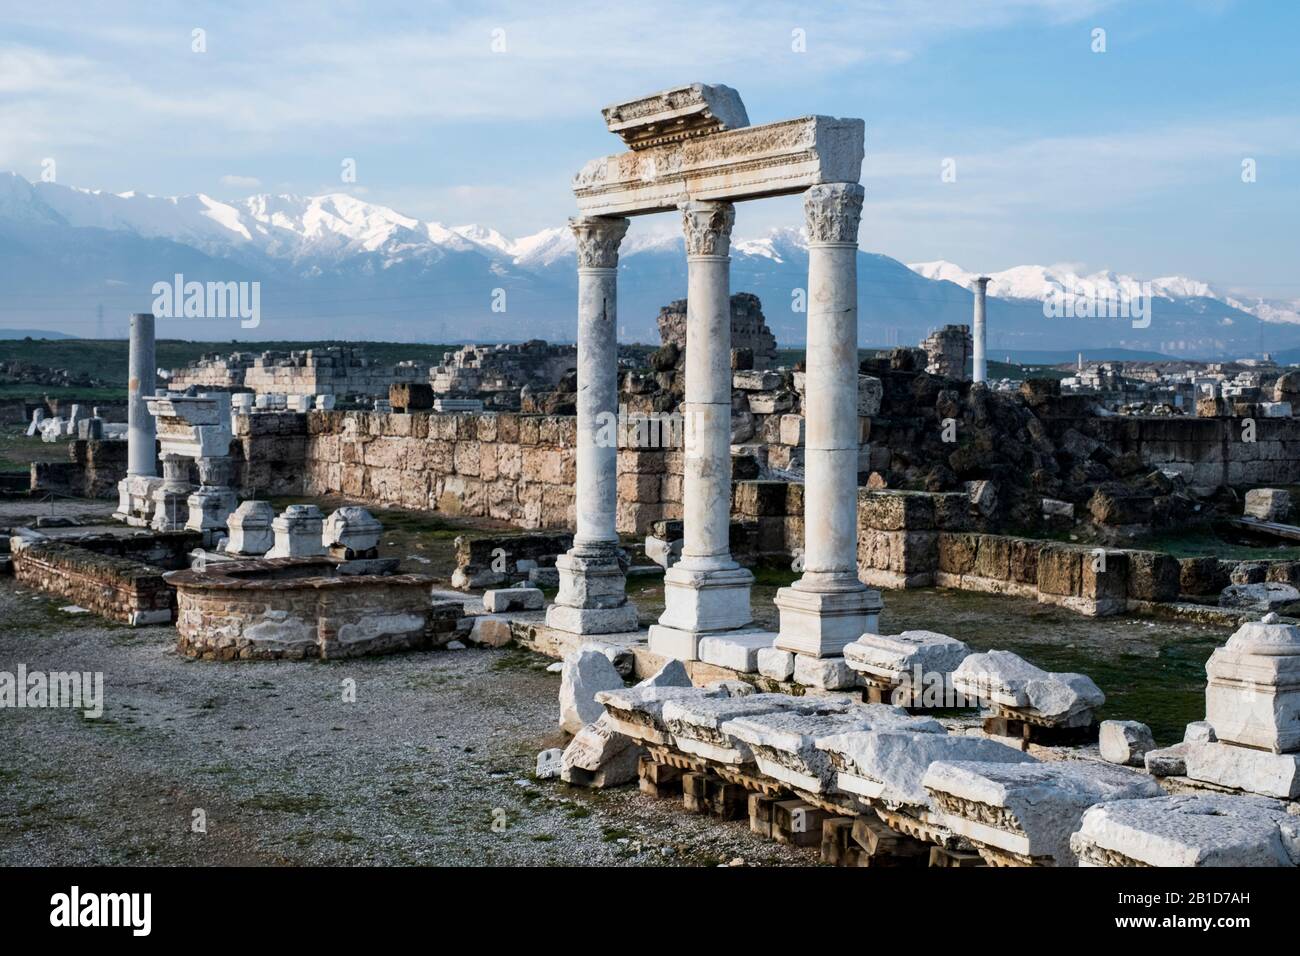 Ruins of Laodicea on the Lycus, an ancient city built on the river Lycus Stock Photo